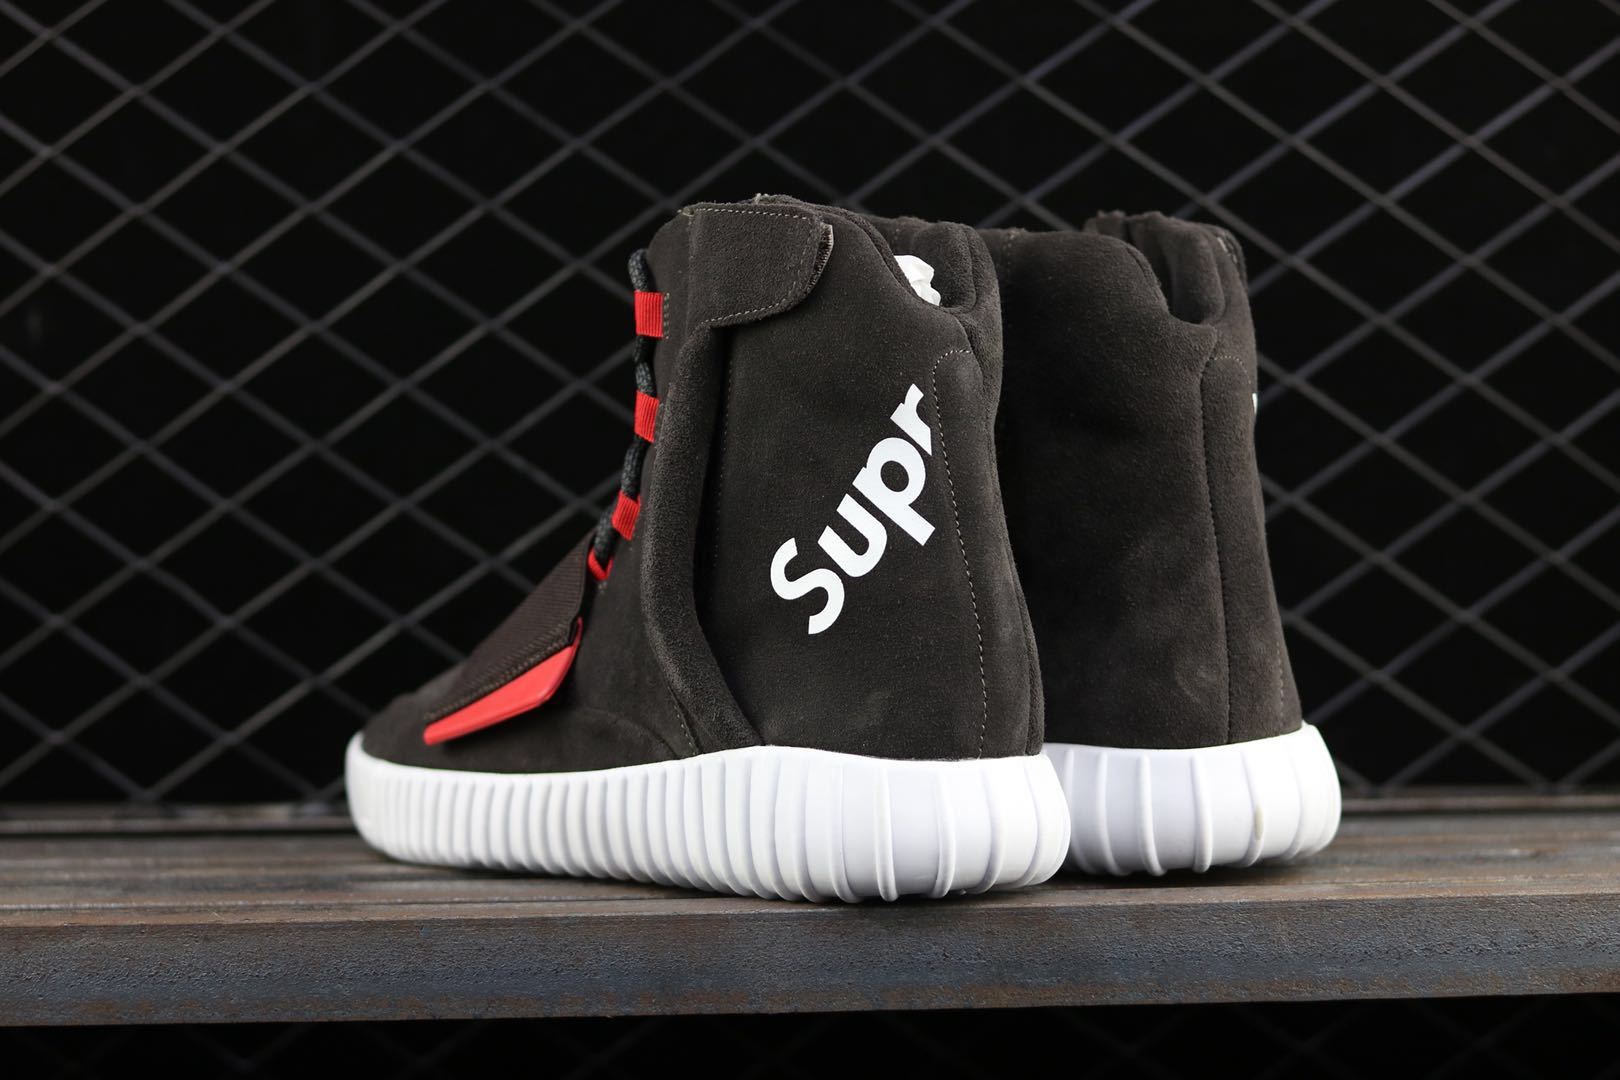 Supreme x Adidas Yeezy Boost 750 Brown/Red White For Sale – The Sole Line